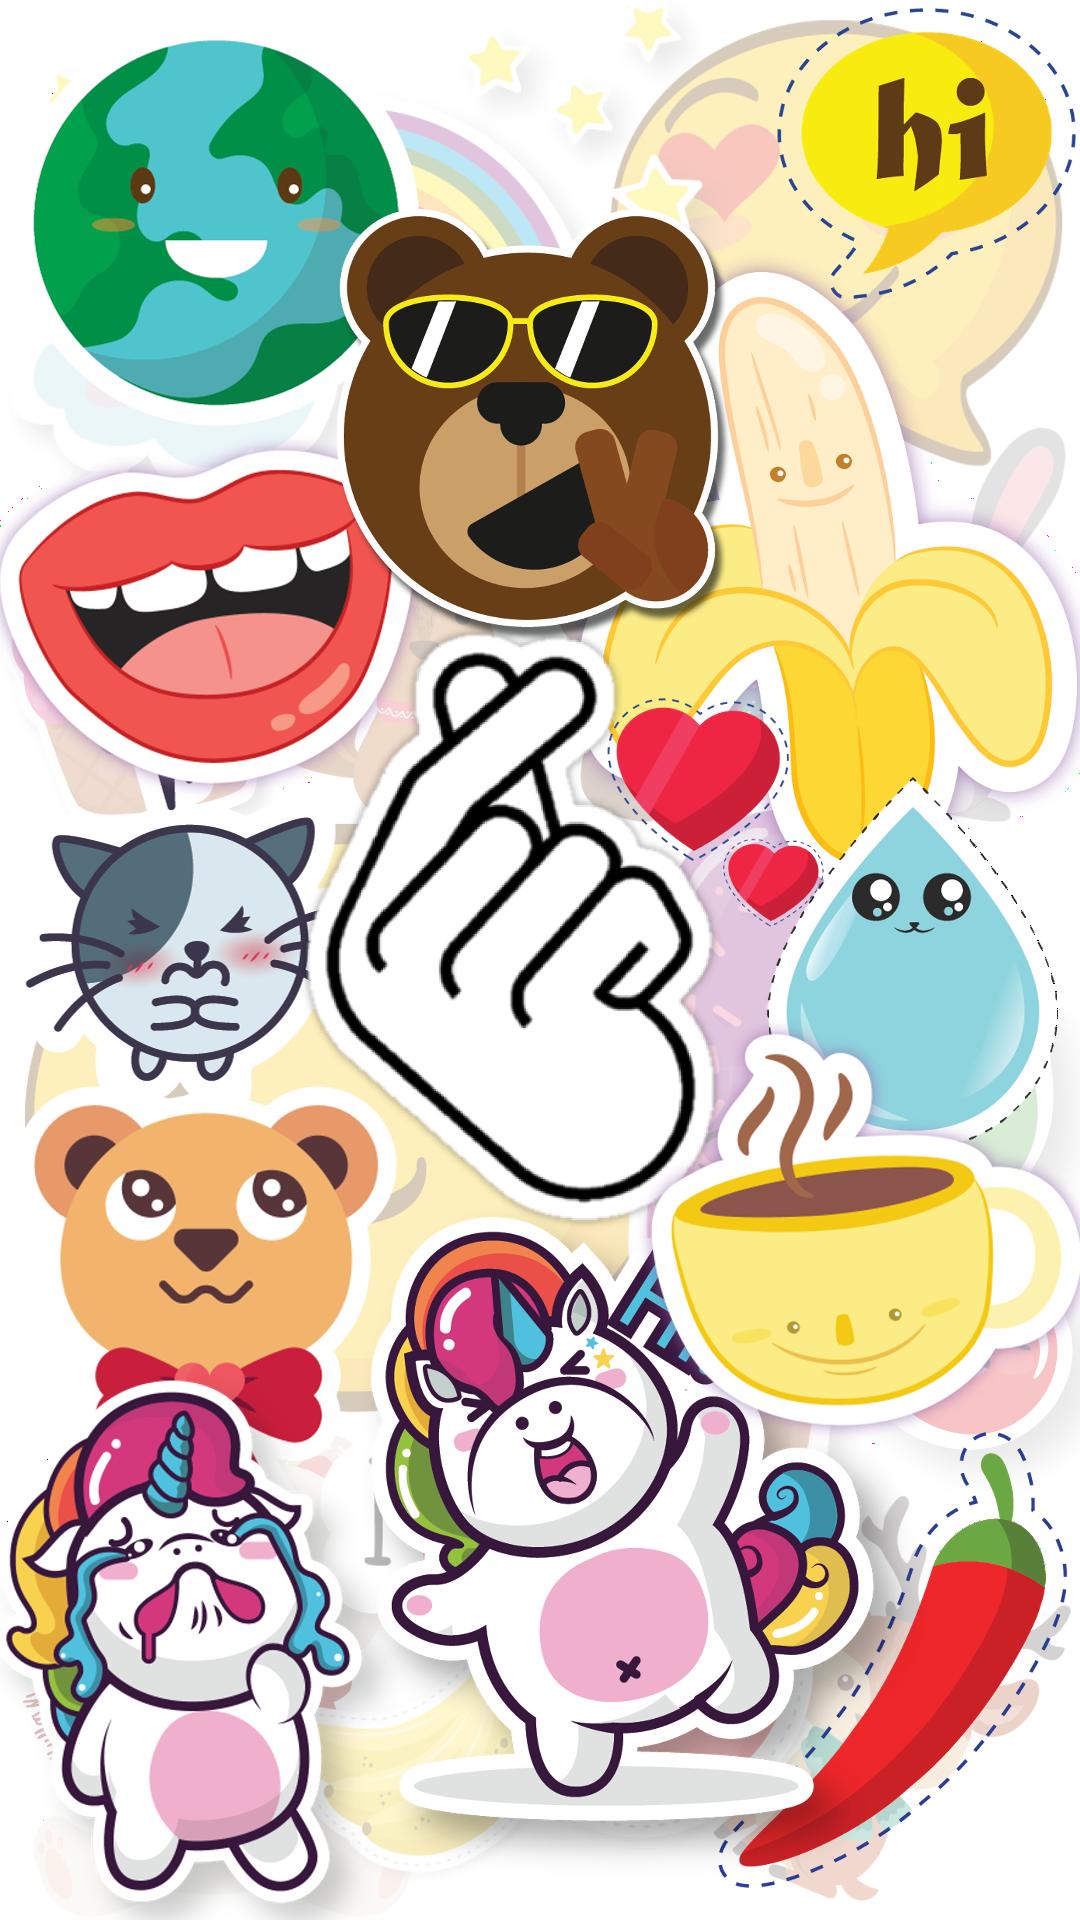 Duduu 80 Sticker Packs For Whatsapp For Android Apk Download